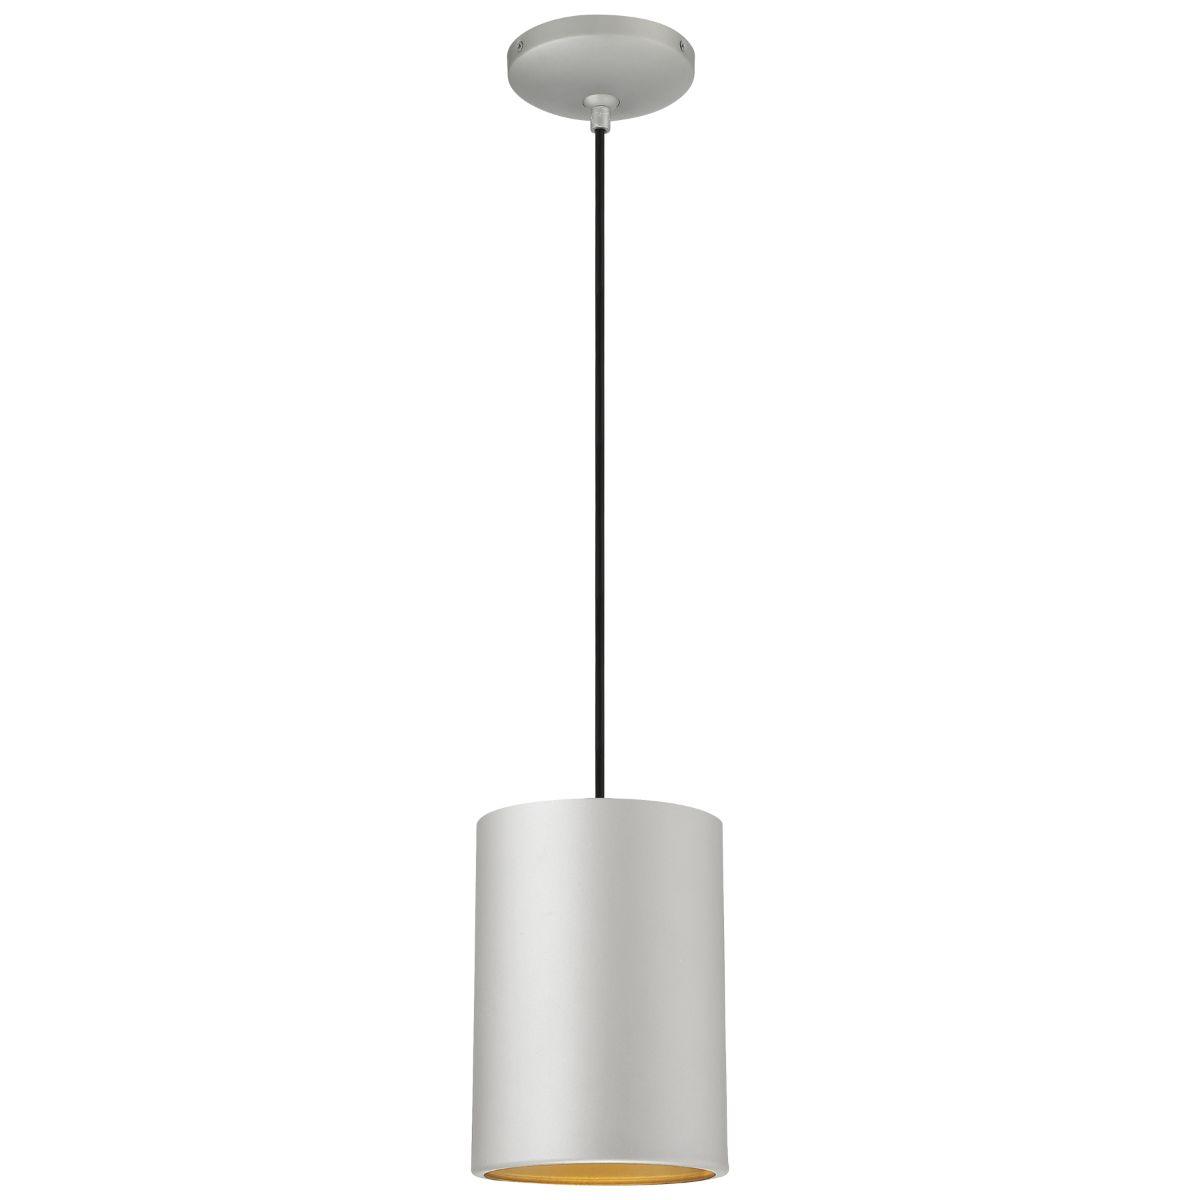 Pilson XL 7 in. LED Pendant Light with Cord - Bees Lighting